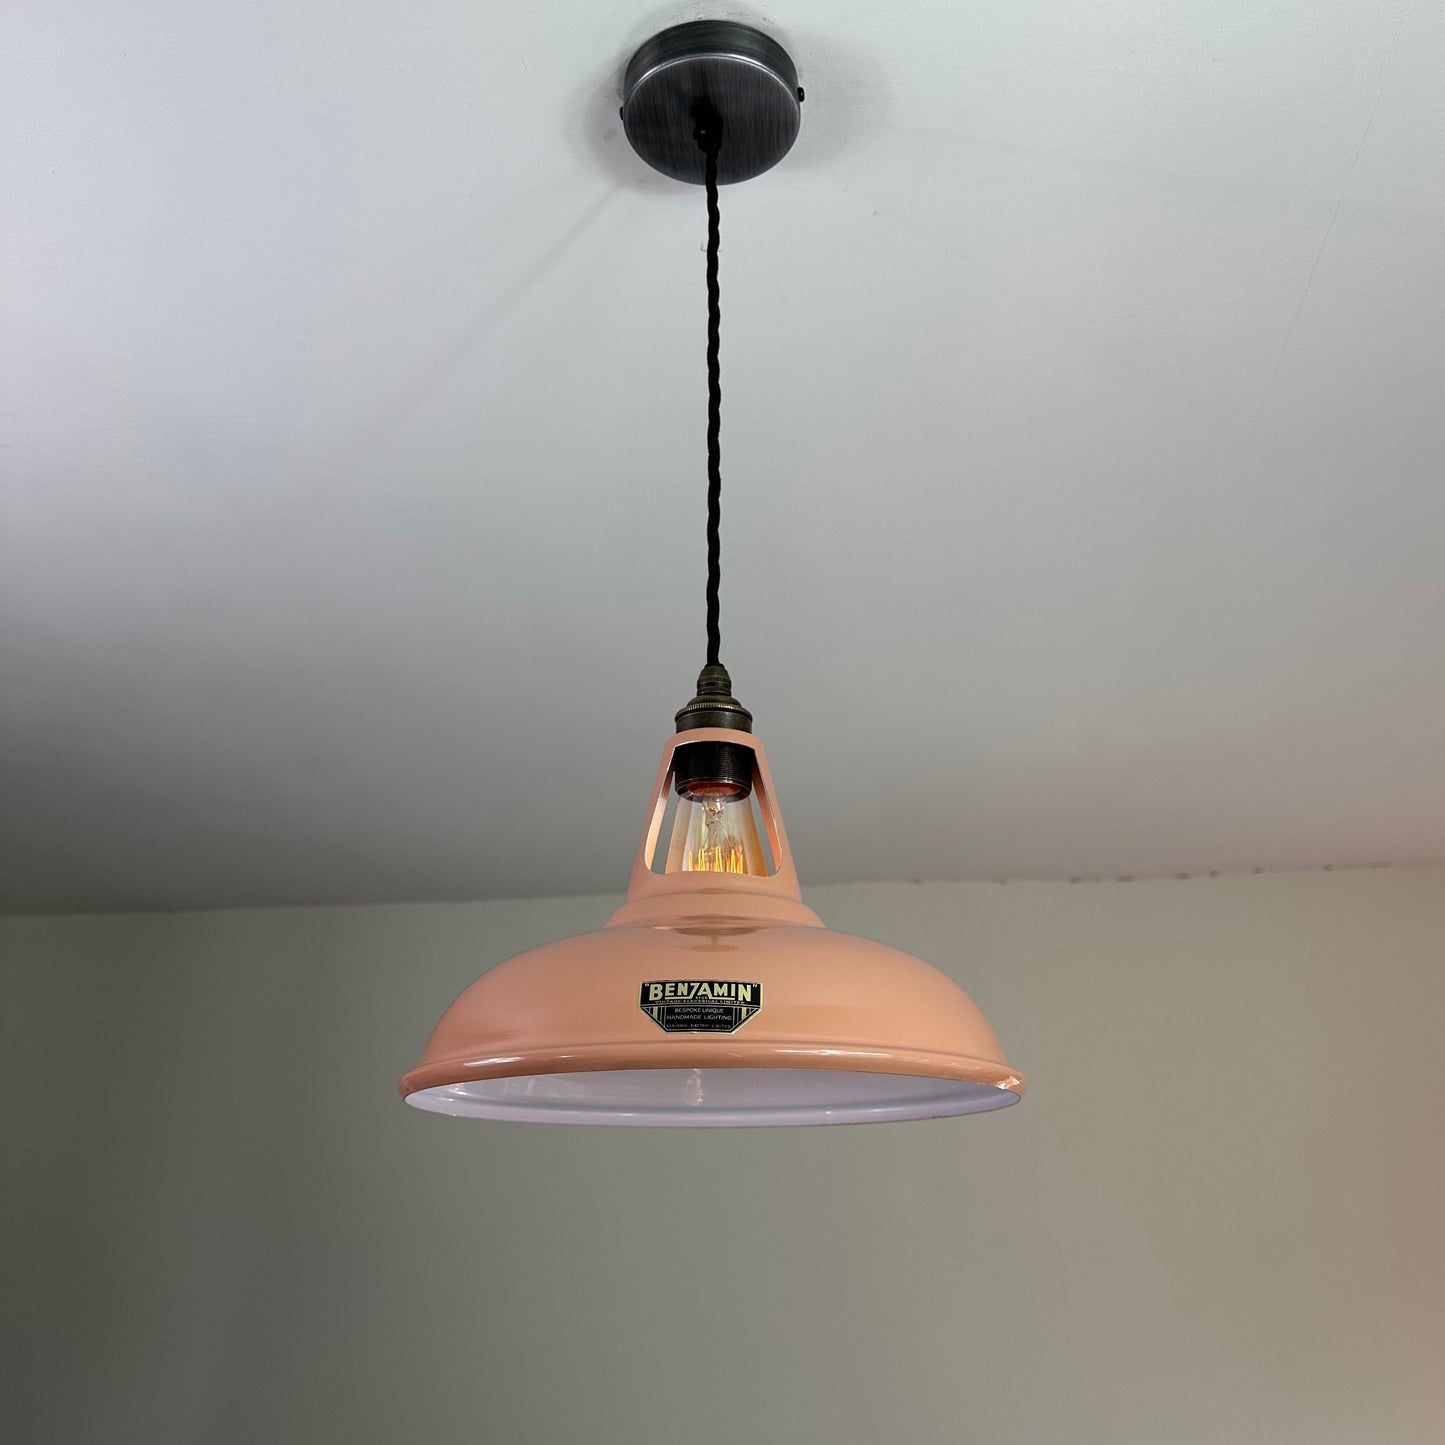 Cawston ~ Terracotta Solid Shade Slotted Design Pendant Set Light Ceiling Dining Room Kitchen Table | Vintage Filament Bulb 11 Inch